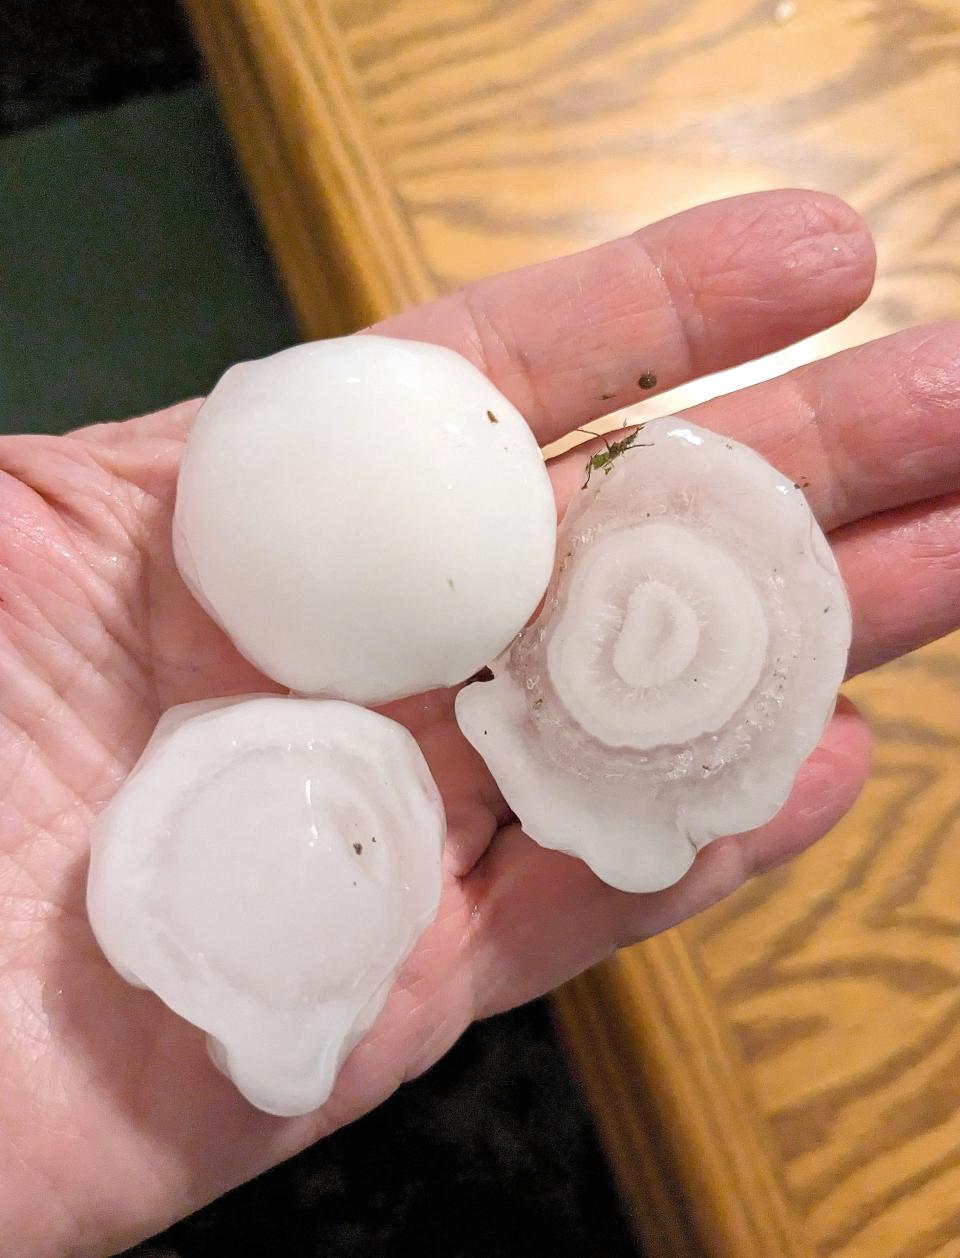 Hail held by Julie Korte that fell in her yard during a May 7 storm.